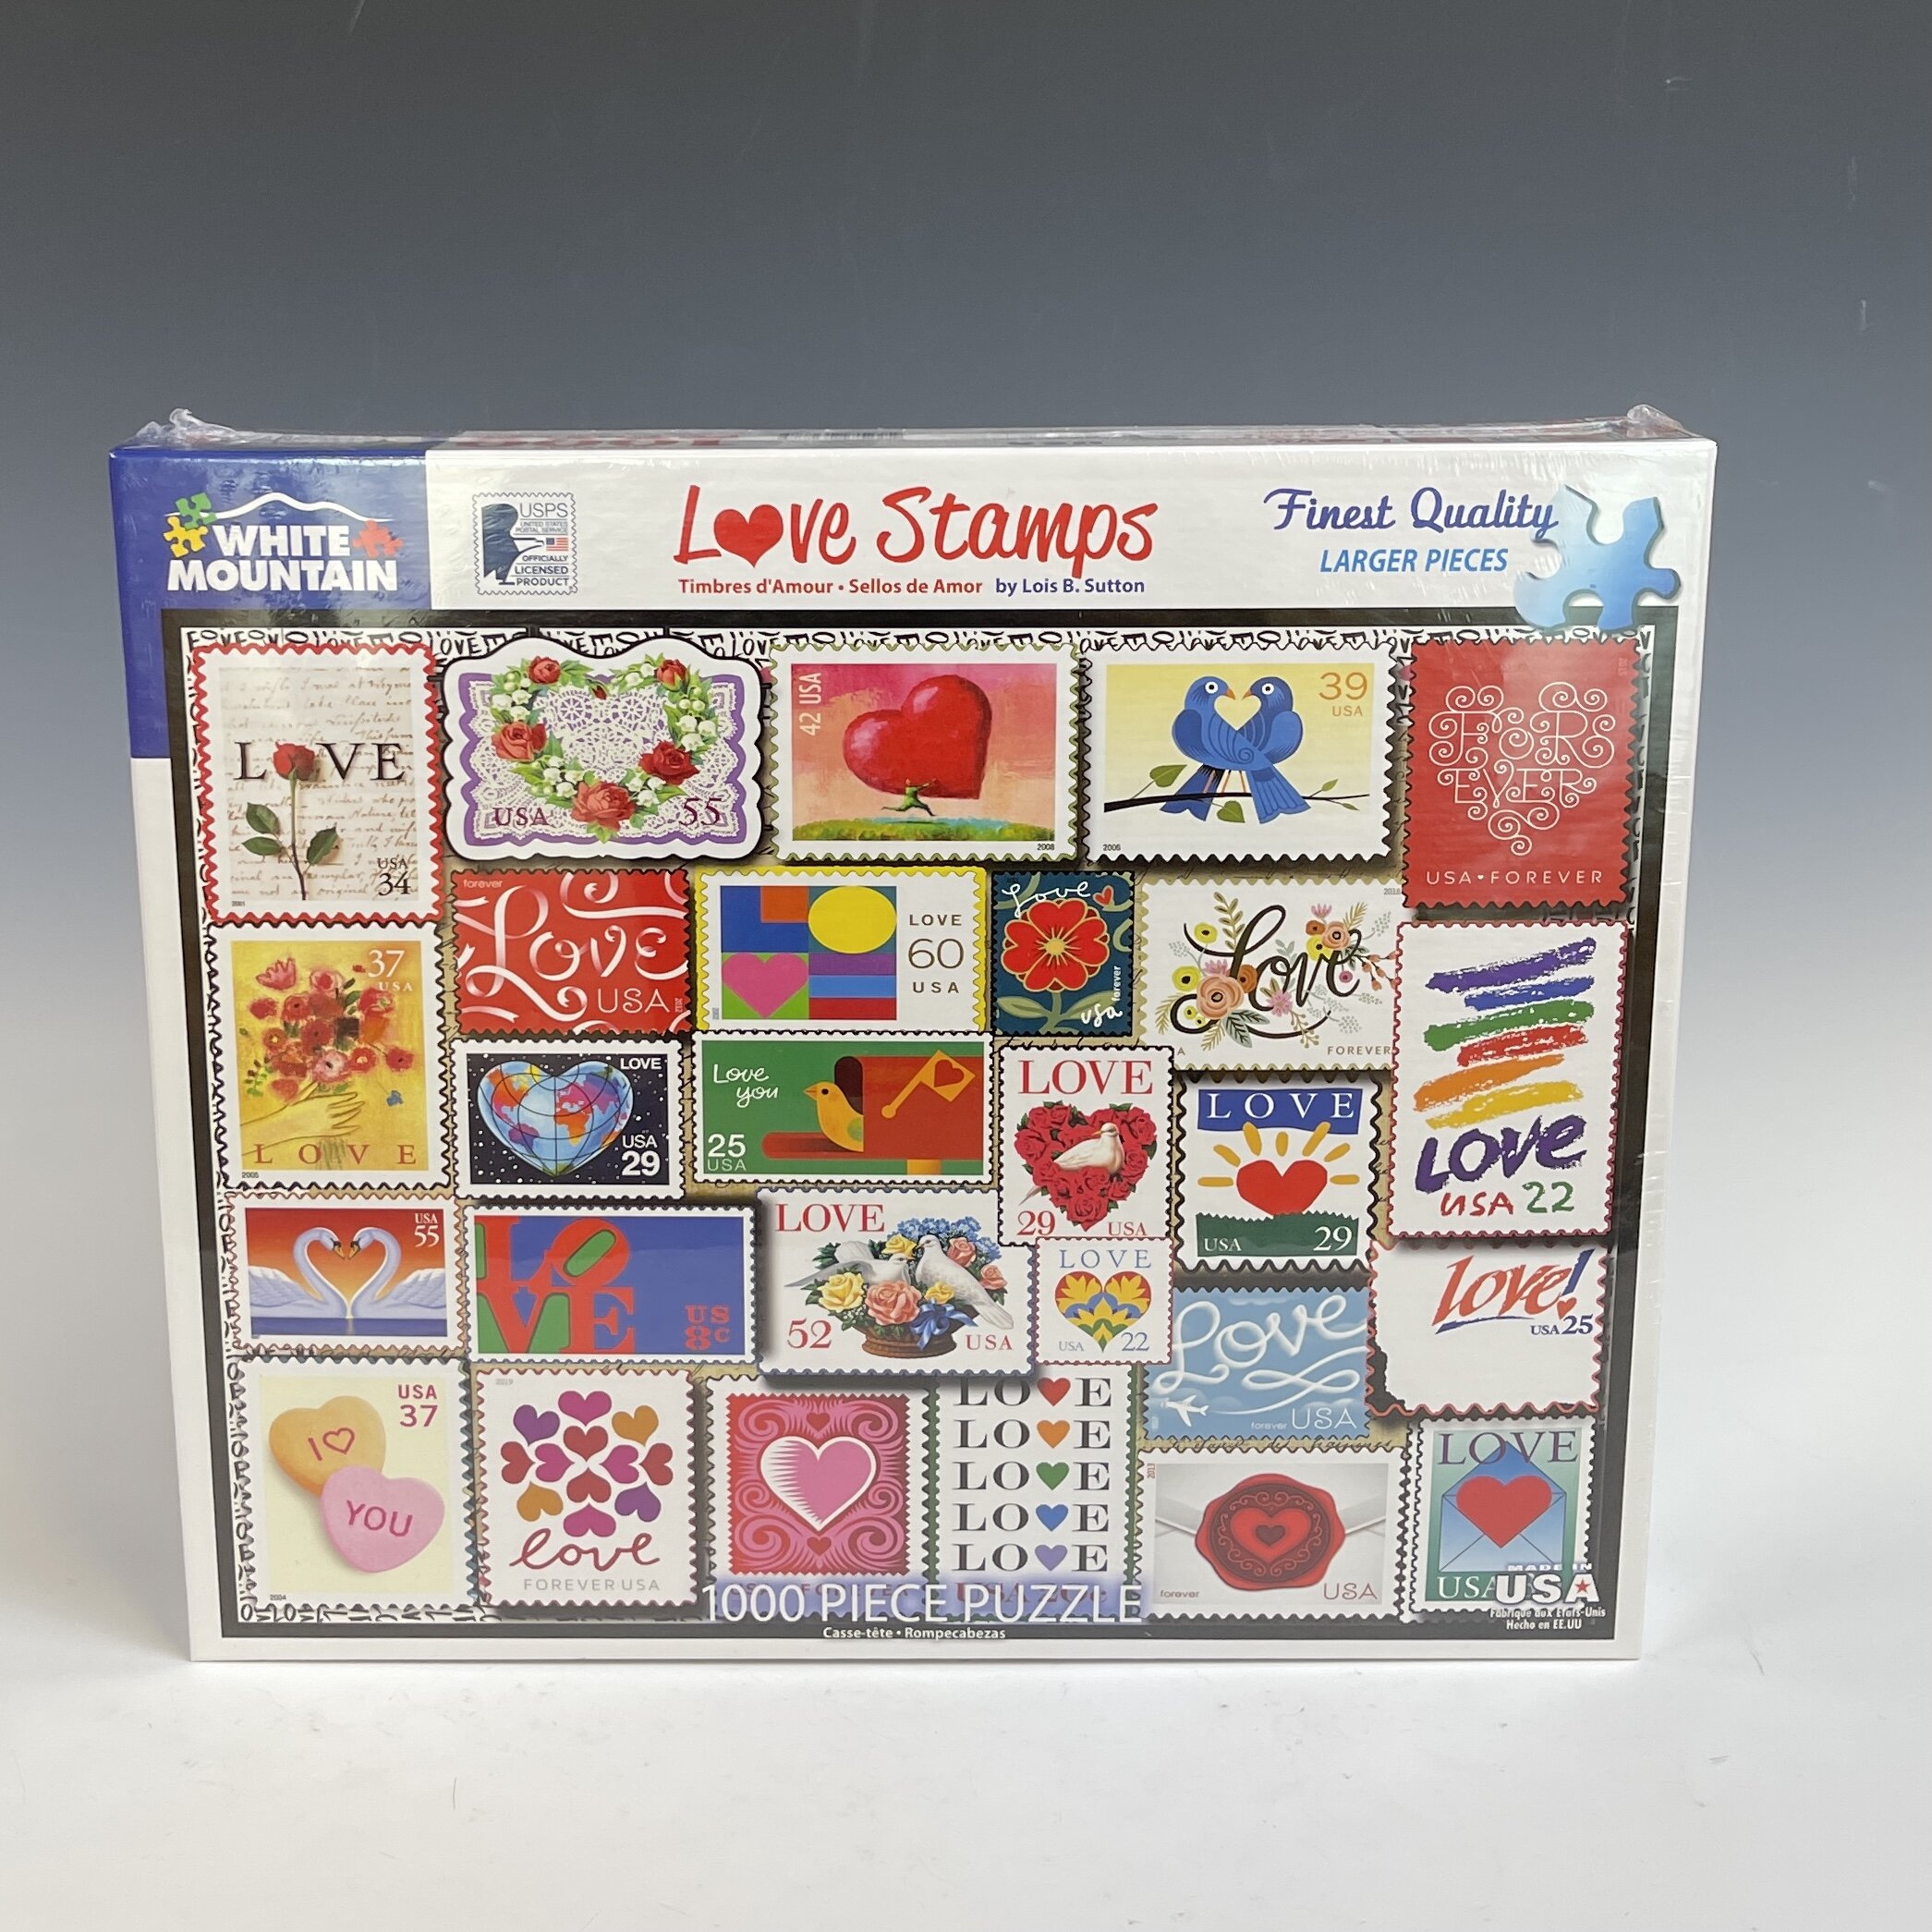 WHITE MOUNTAIN PUZZLE LOVE STAMPS BRAND NEW 1000 PIECE JIGSAW PUZZLE 